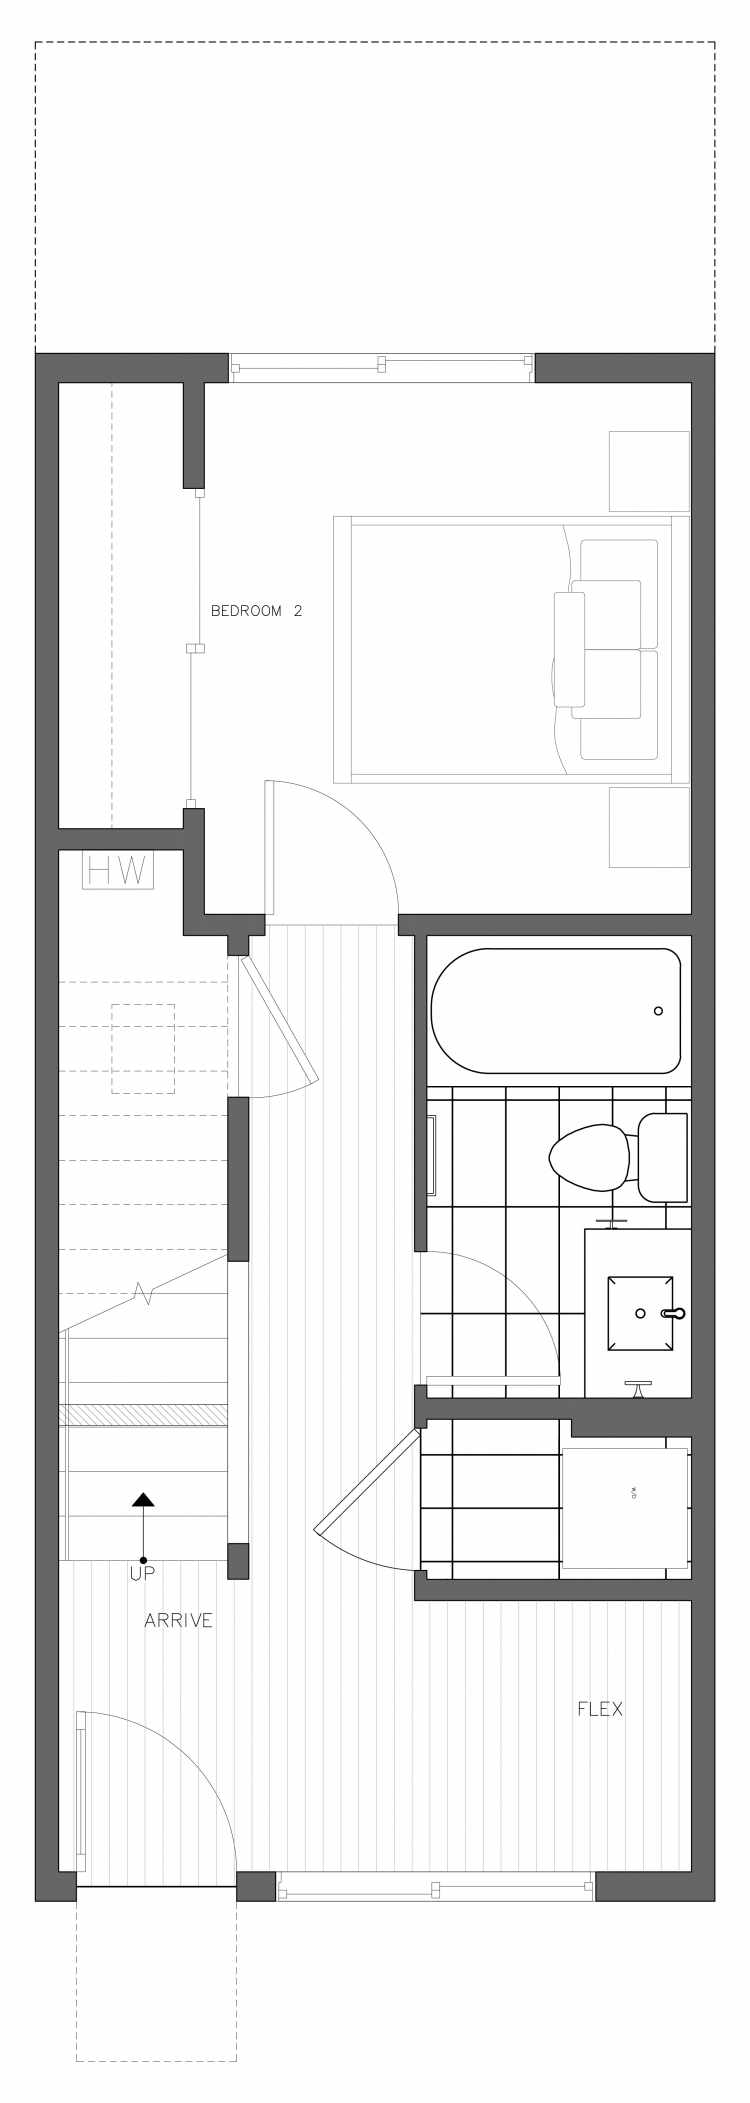 First Floor Plan of 3406C 15th Ave W, One of the Arlo Townhomes in North Queen Anne